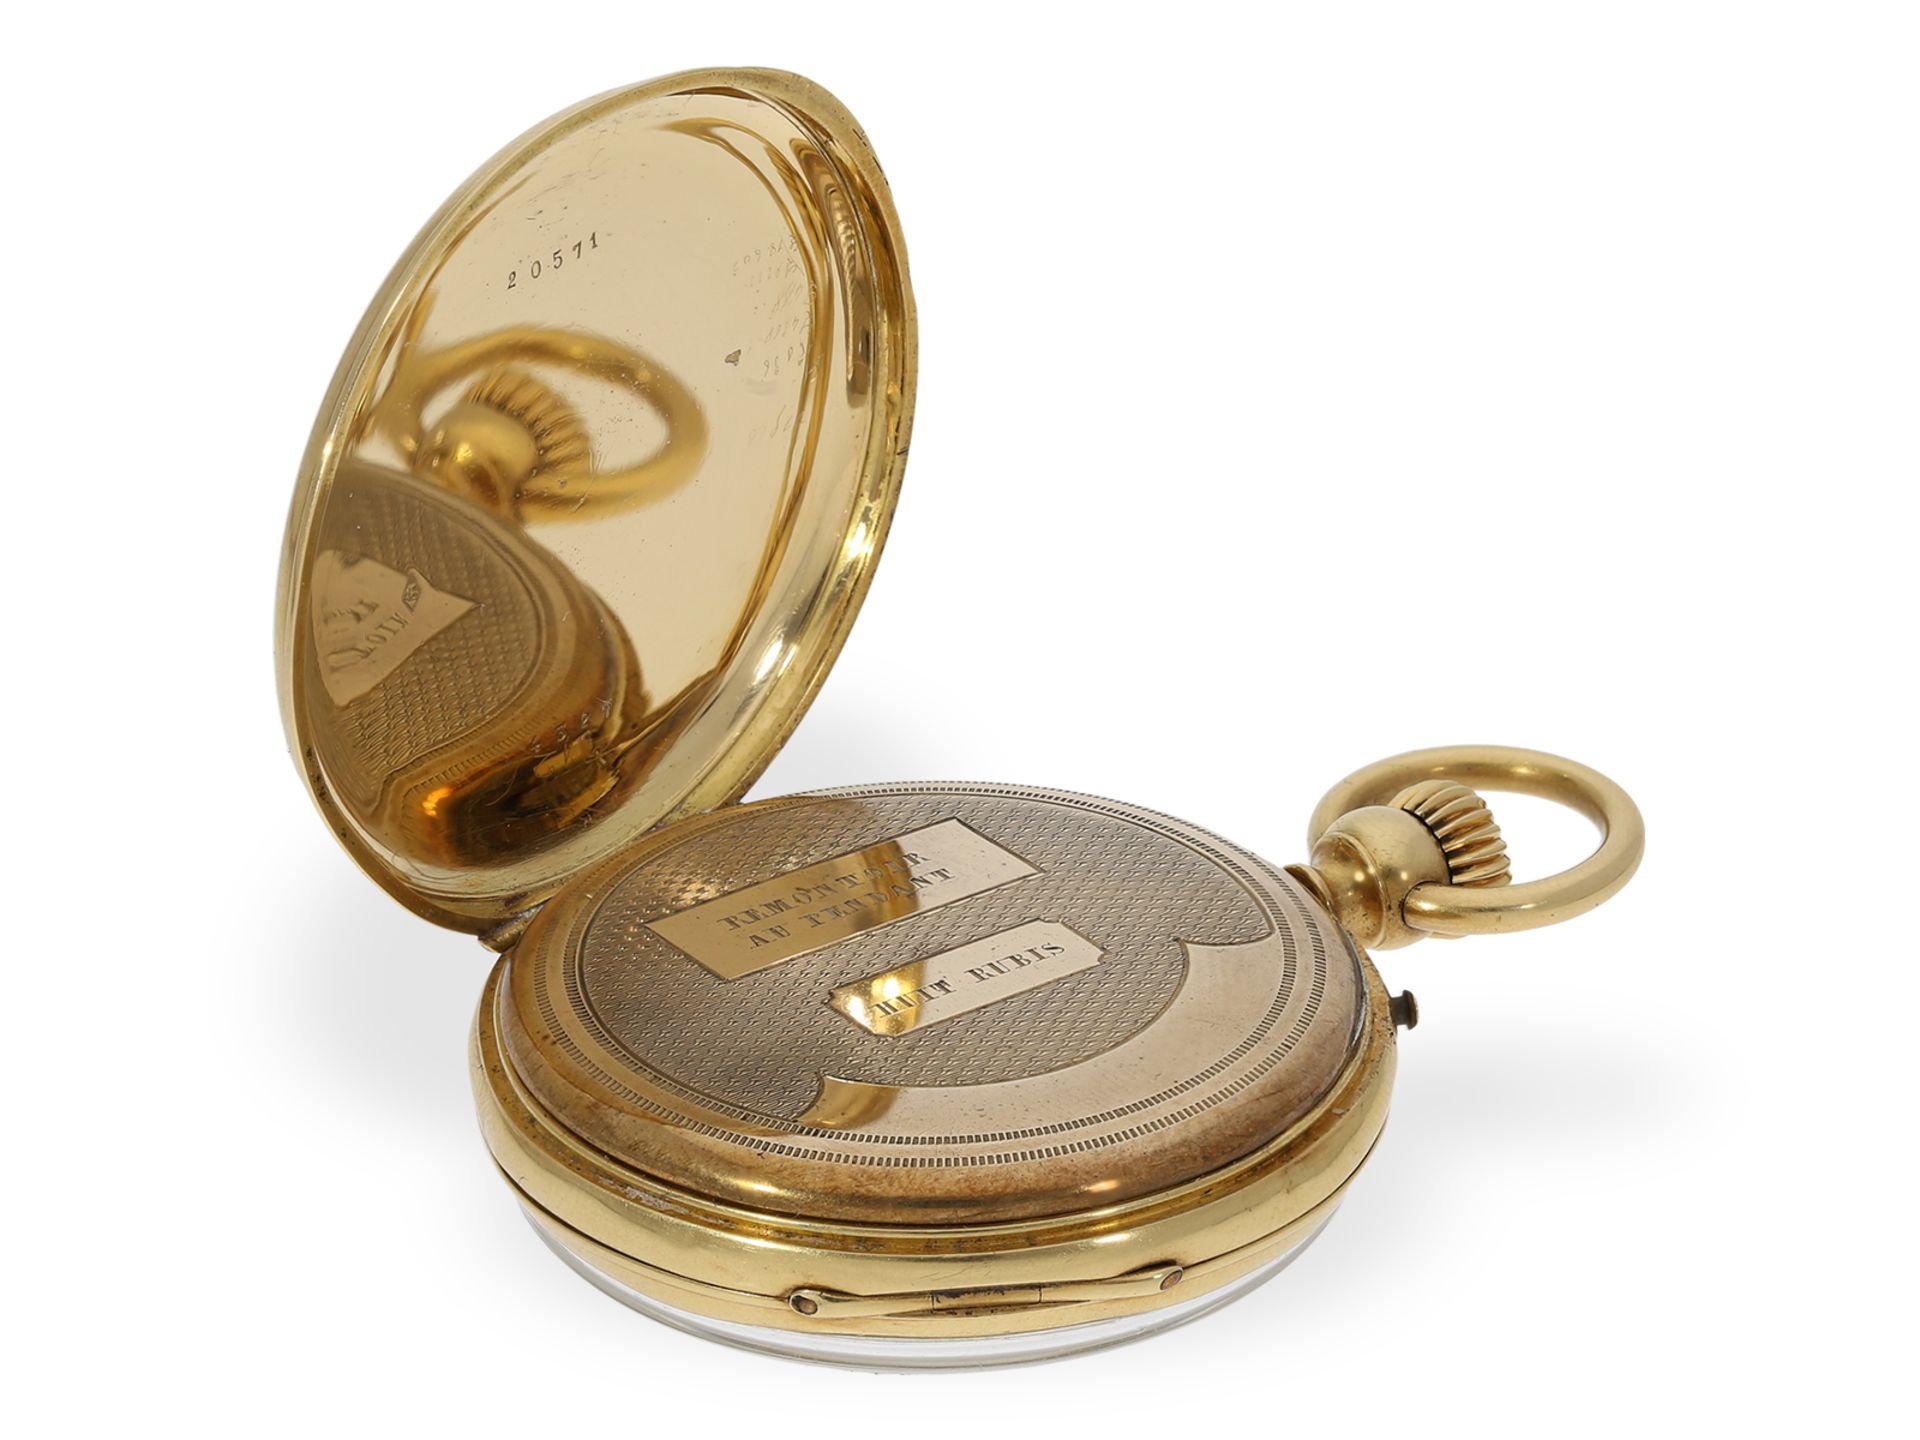 Technically interesting pocket watch with very early crown winding patent, ca. 1850 - Image 5 of 7